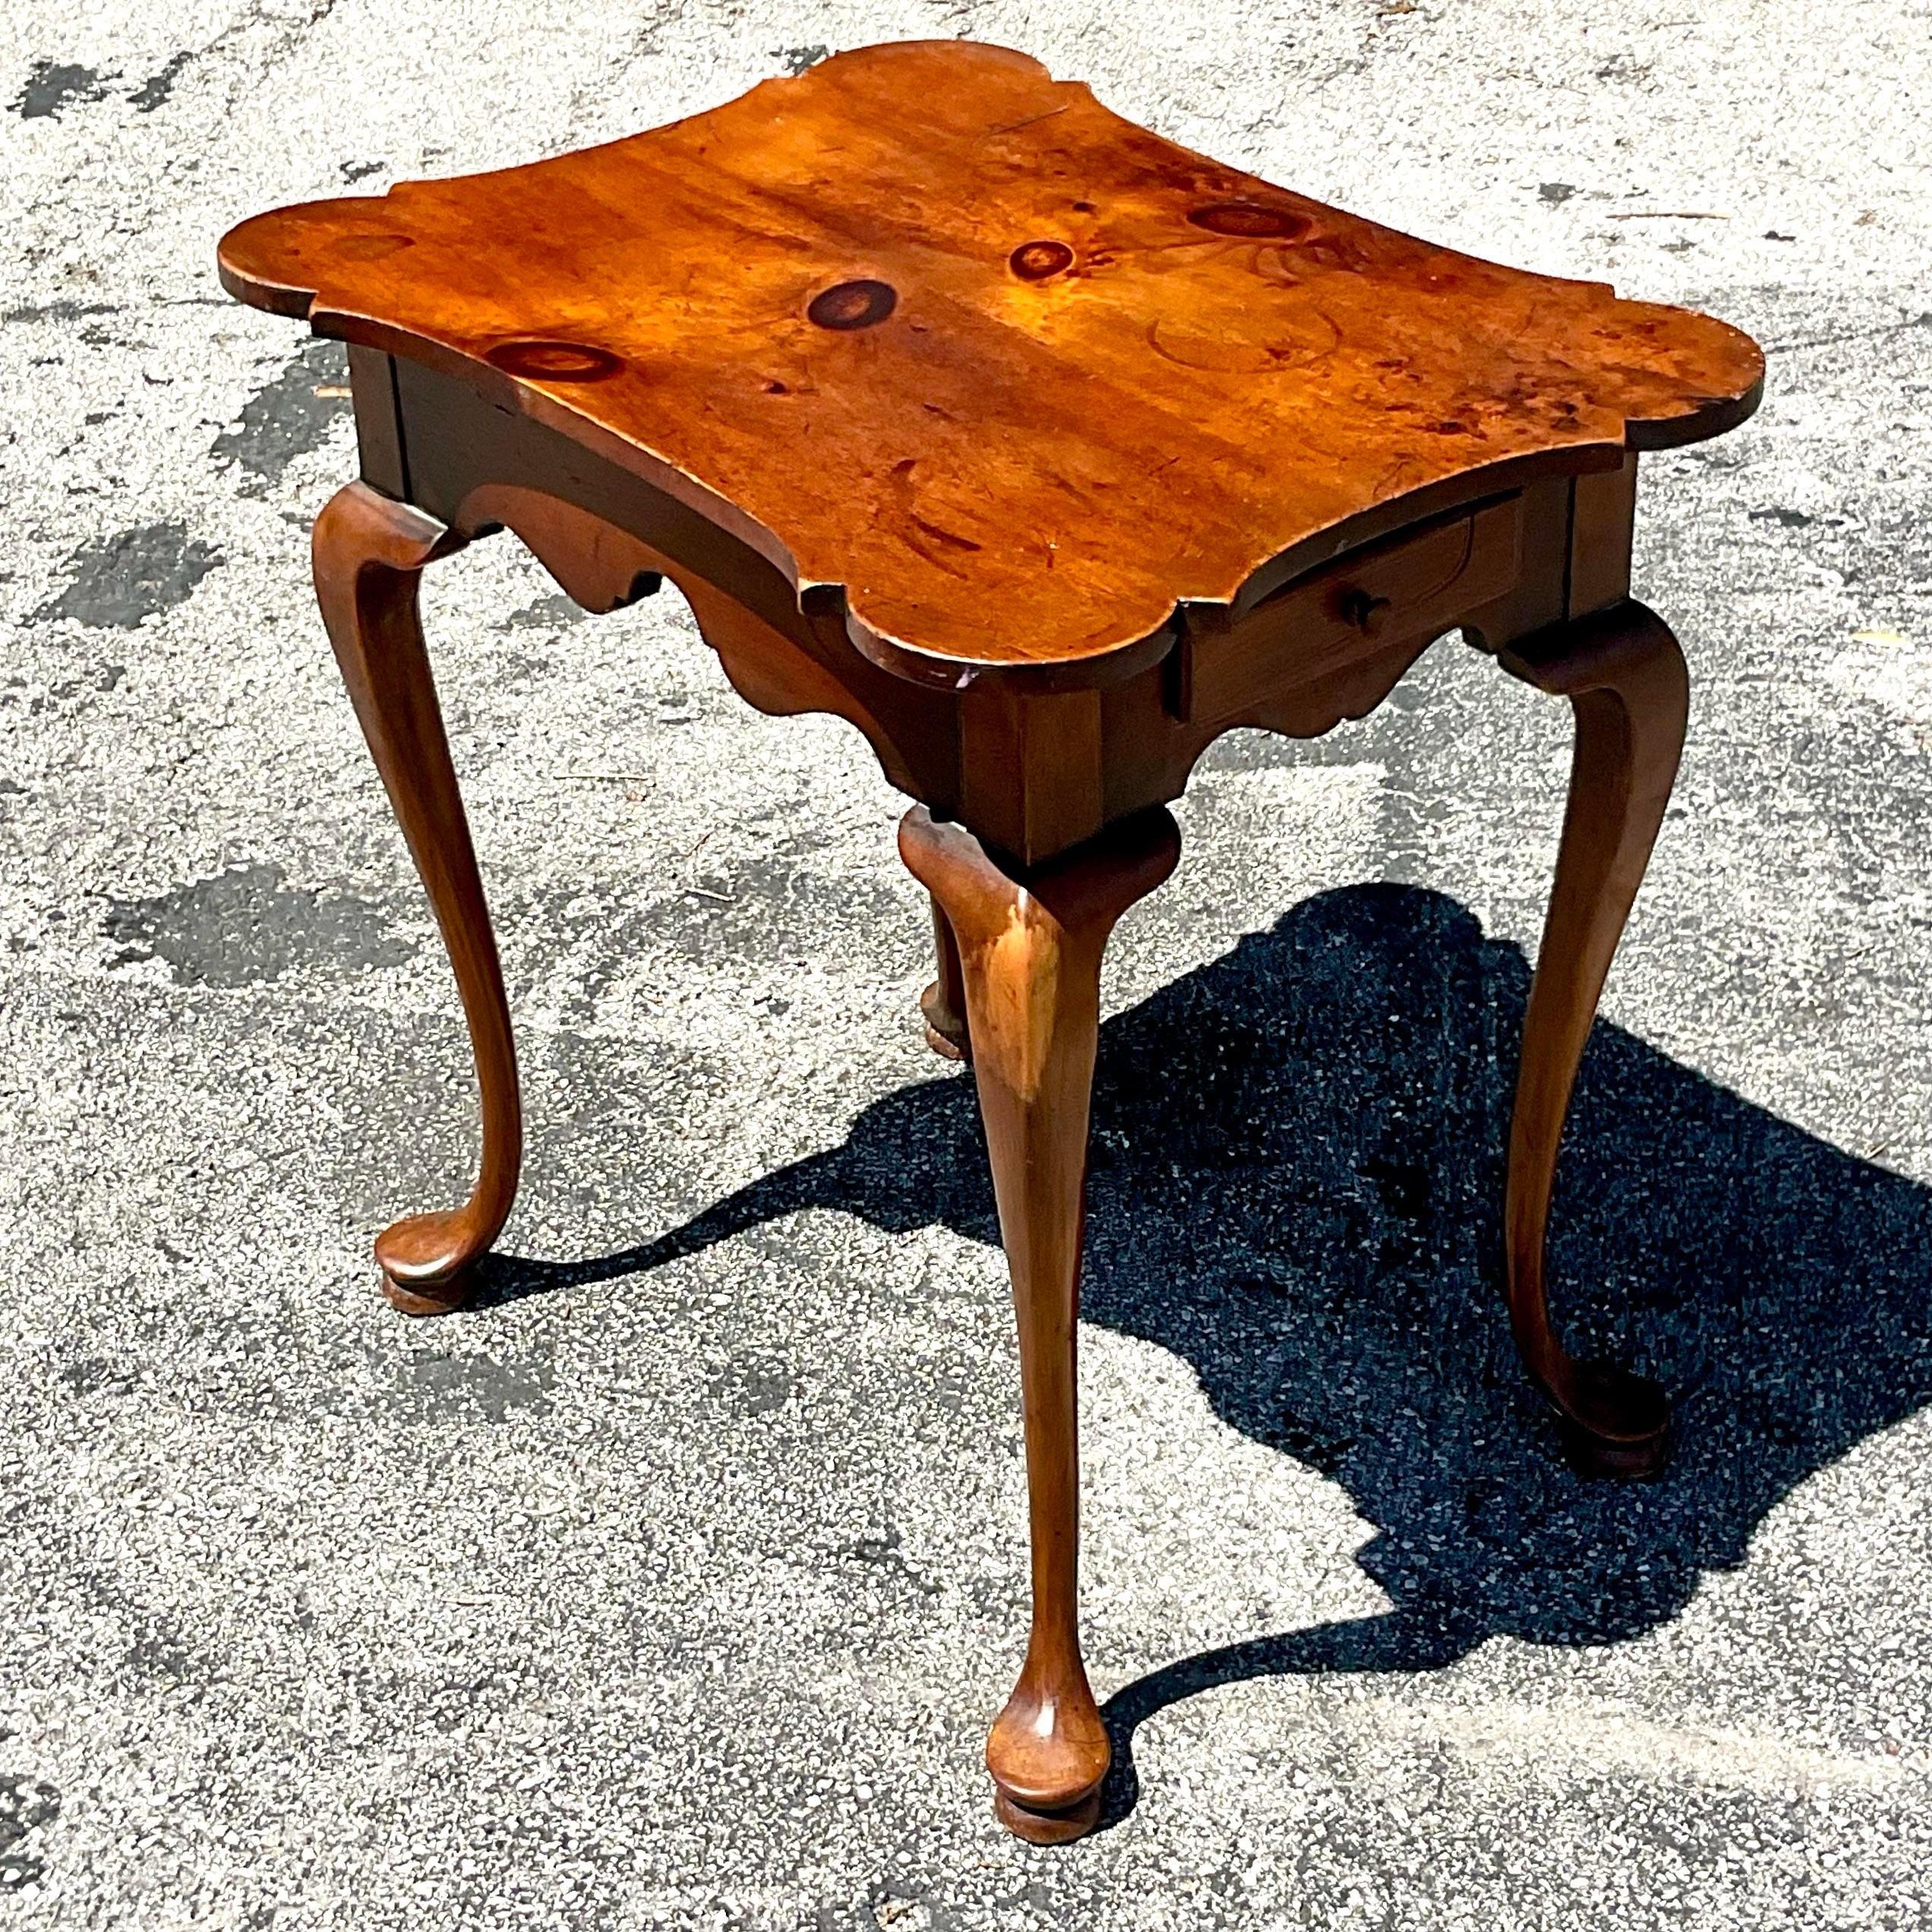 This vintage side table embodies timeless American style with its traditional knotty pine construction. Its rustic charm and sturdy craftsmanship evoke a sense of nostalgia, making it a perfect addition to any home seeking a touch of classic